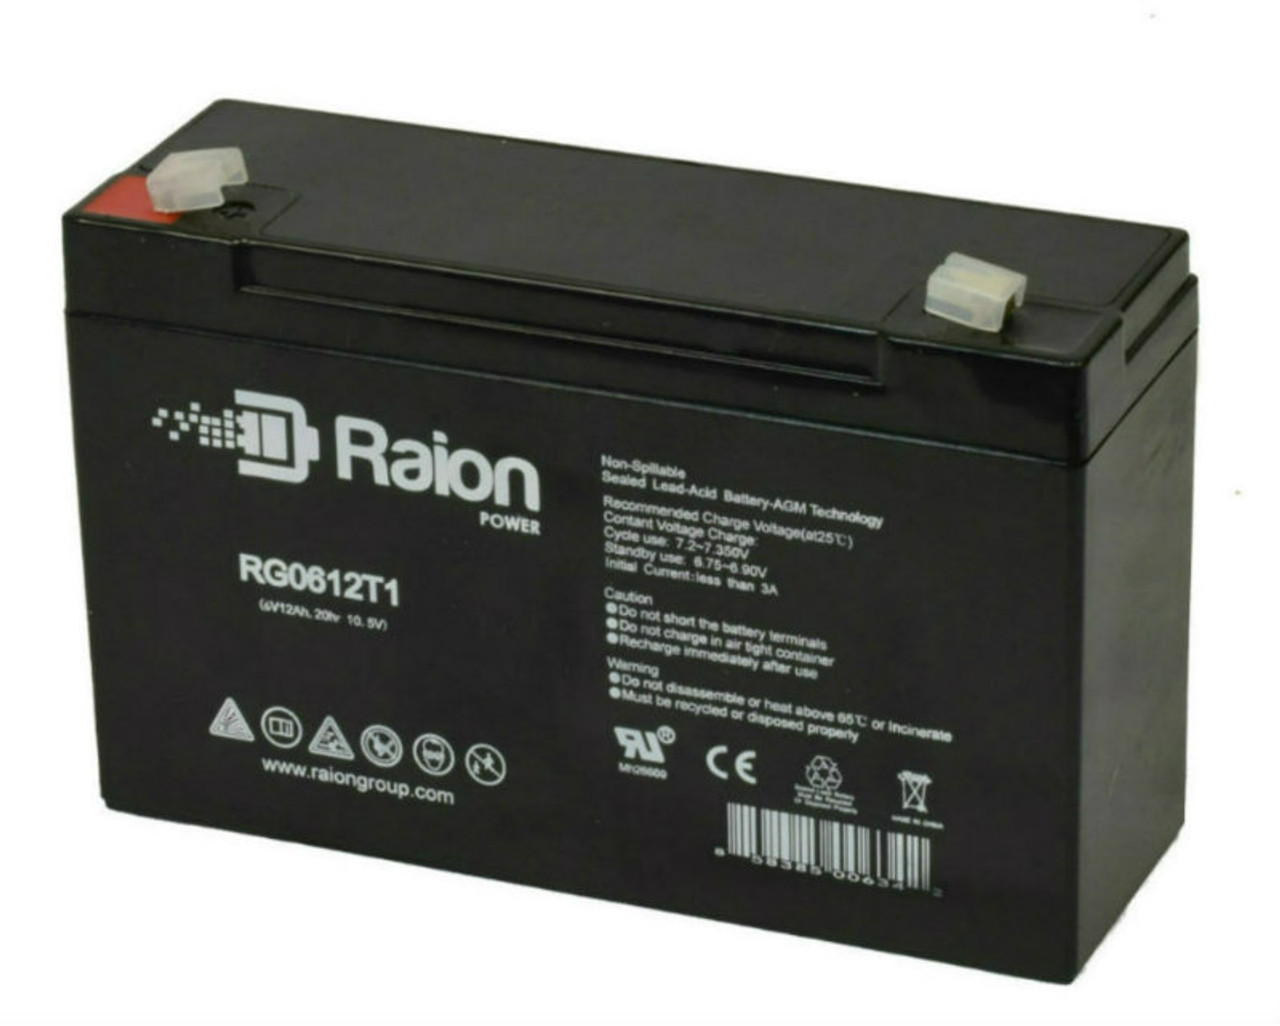 Raion Power RG06120T1 Replacement Battery for OUTDO OT10-6